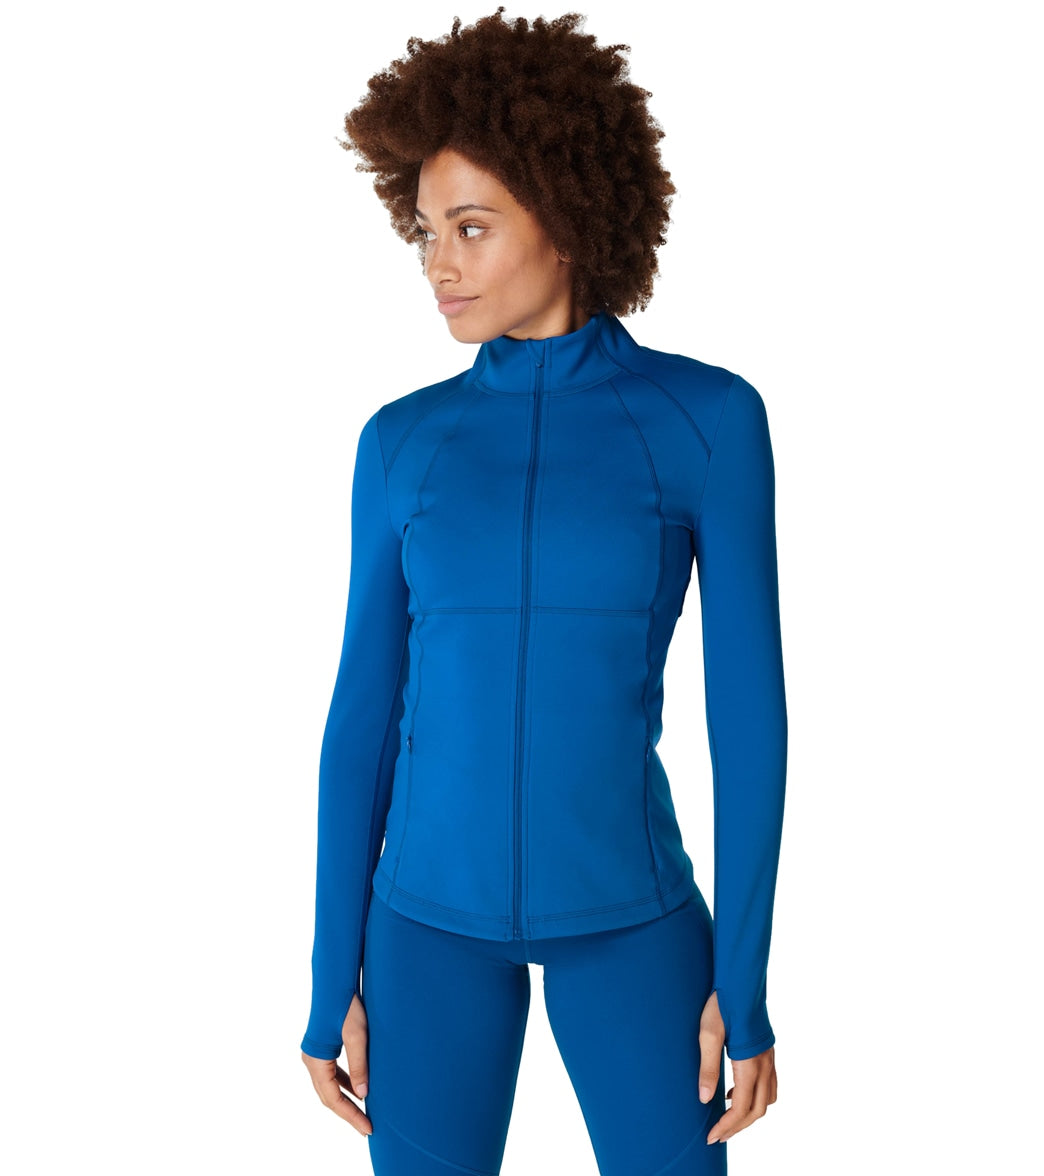 Sweaty Betty Power Boost Workout Zip Up at YogaOutlet.com - Free Shipping –